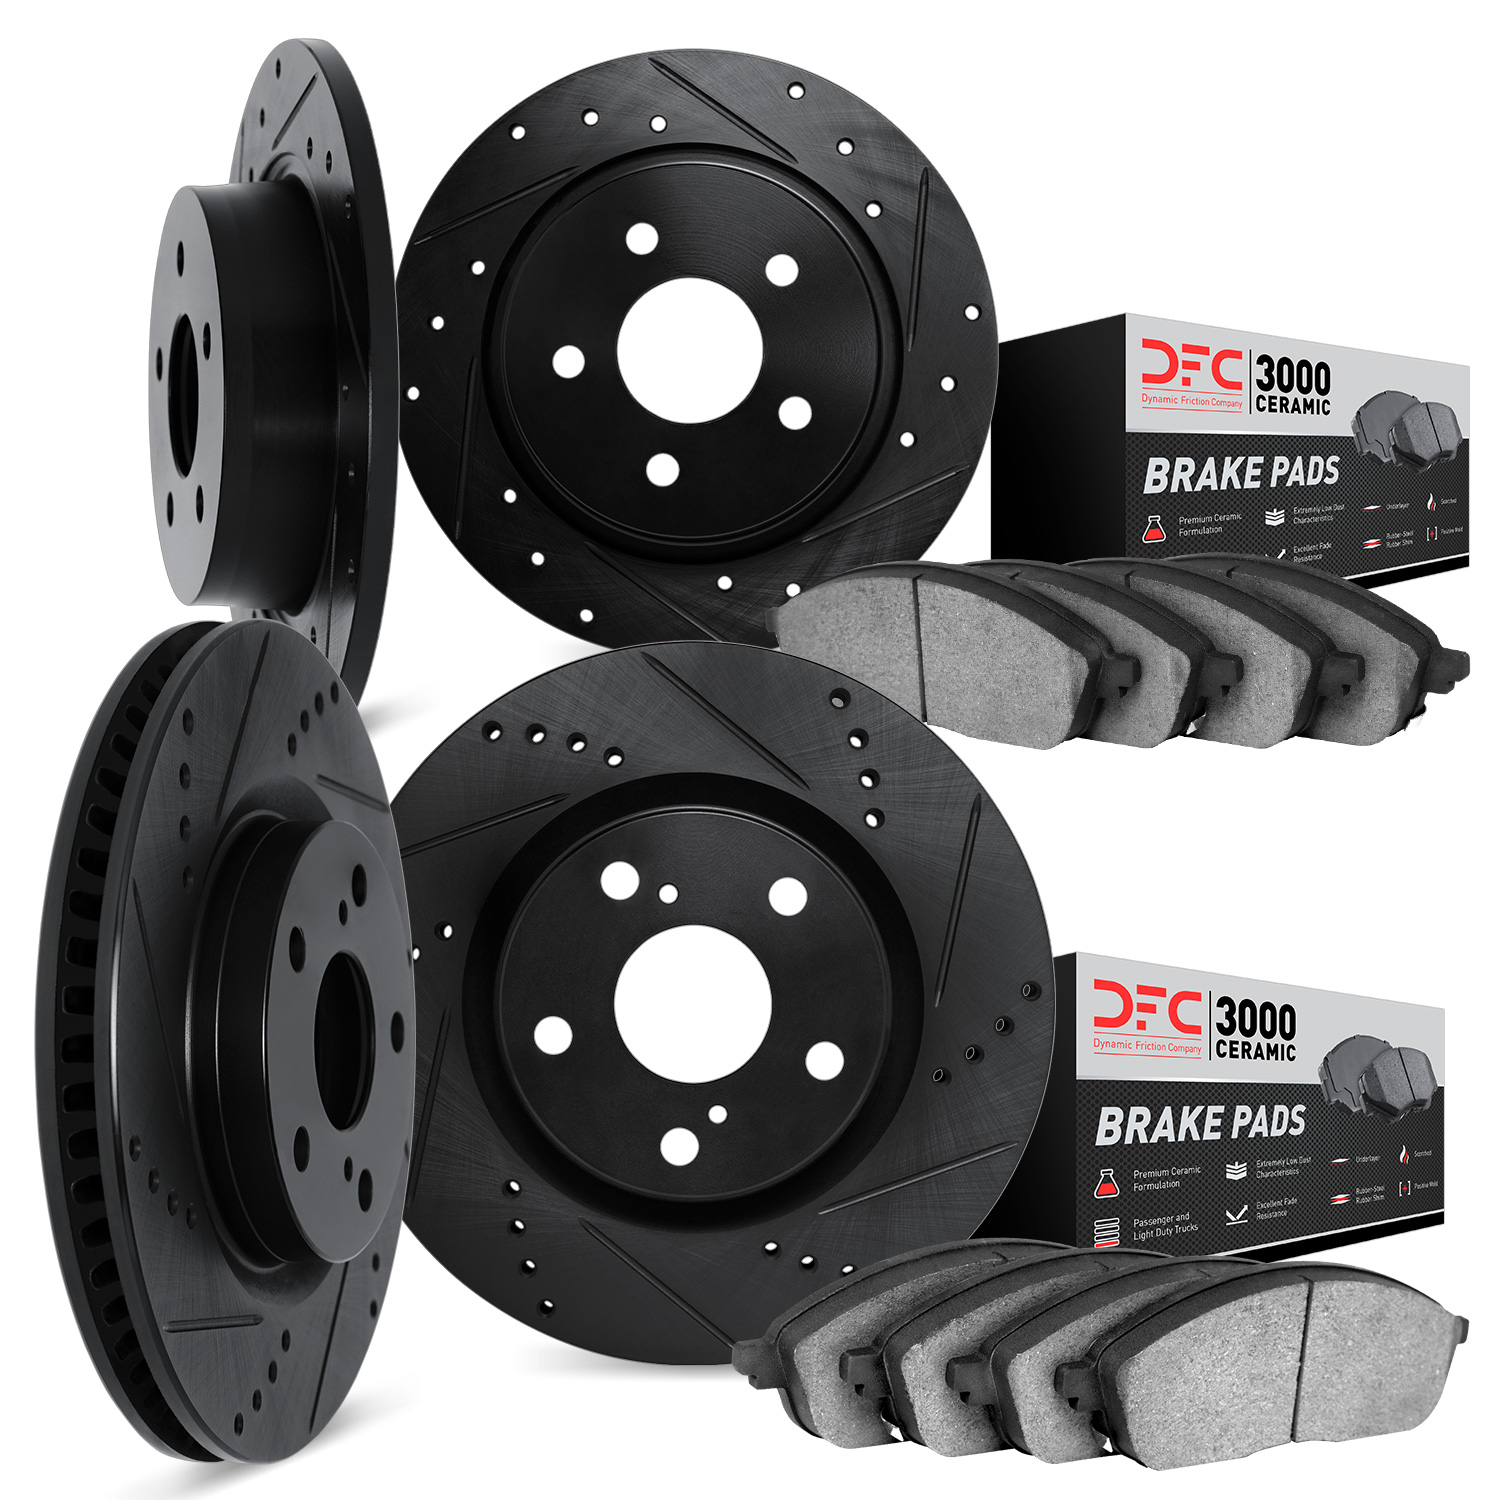 8304-59075 Drilled/Slotted Brake Rotors with 3000-Series Ceramic Brake Pads Kit [Black], Fits Select Acura/Honda, Position: Fron